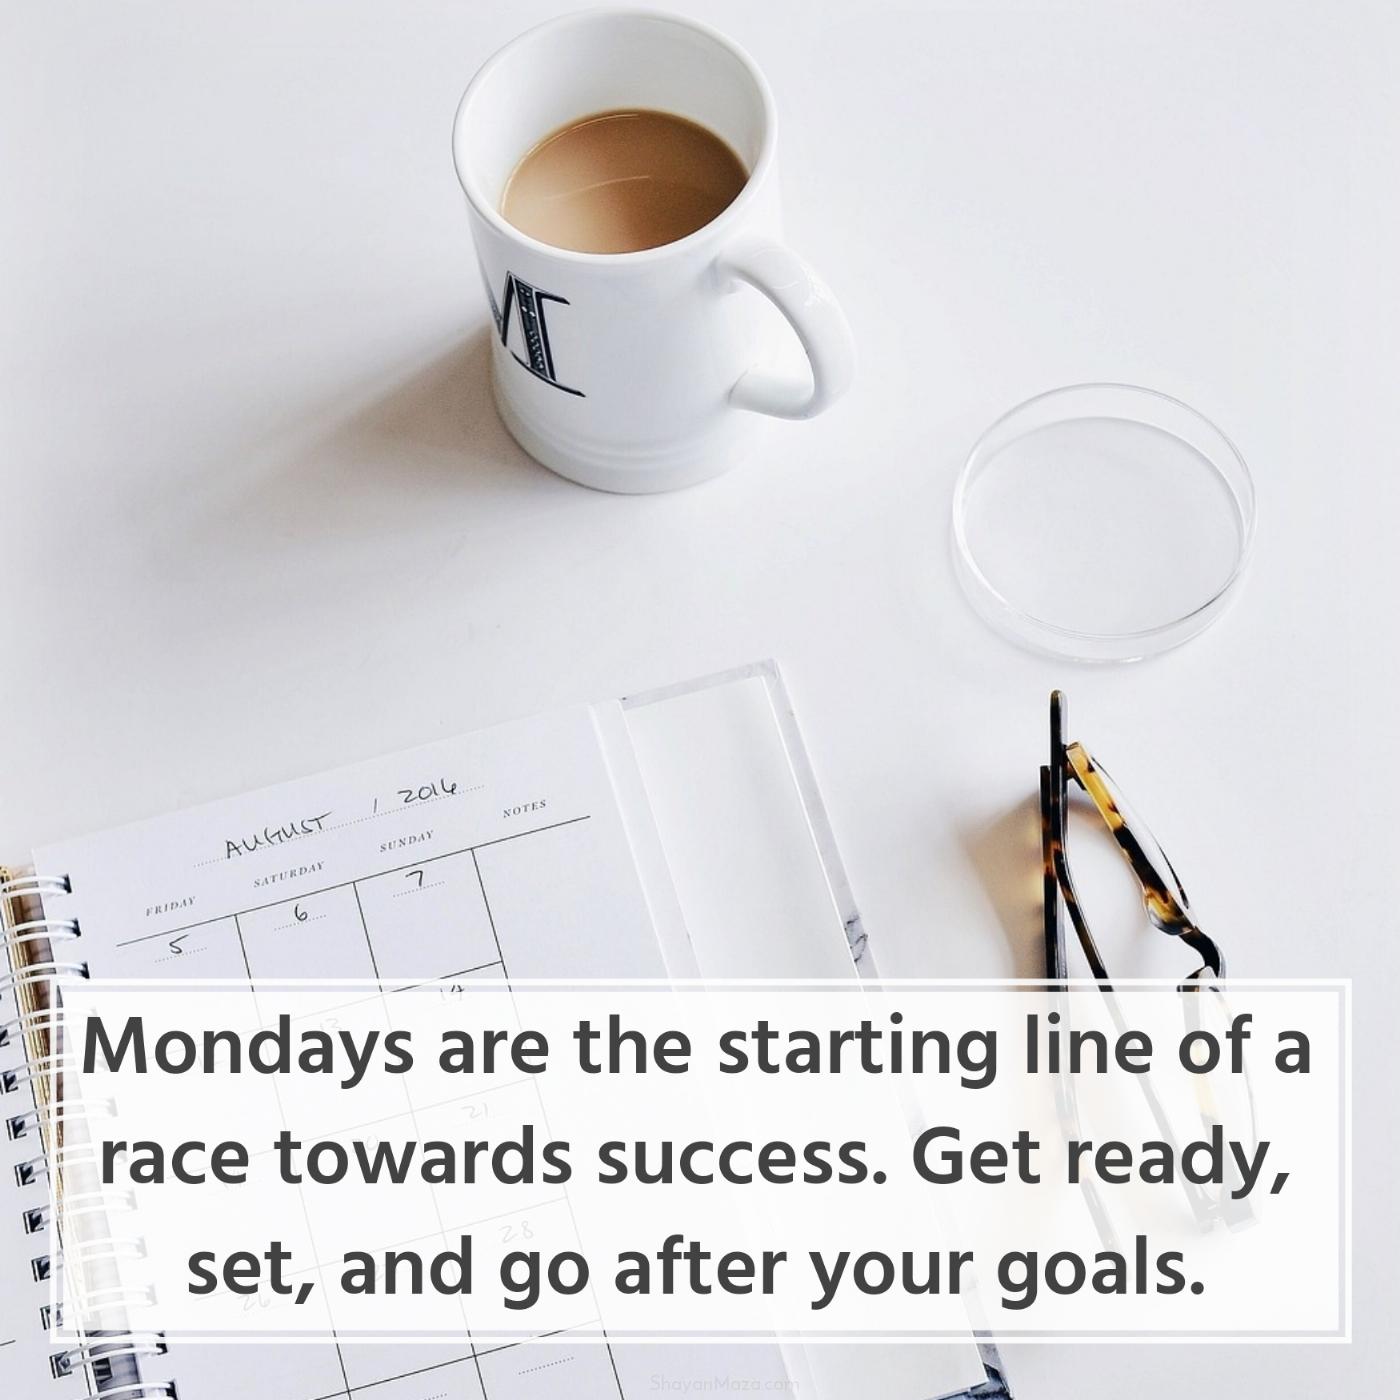 Mondays are the starting line of a race towards success